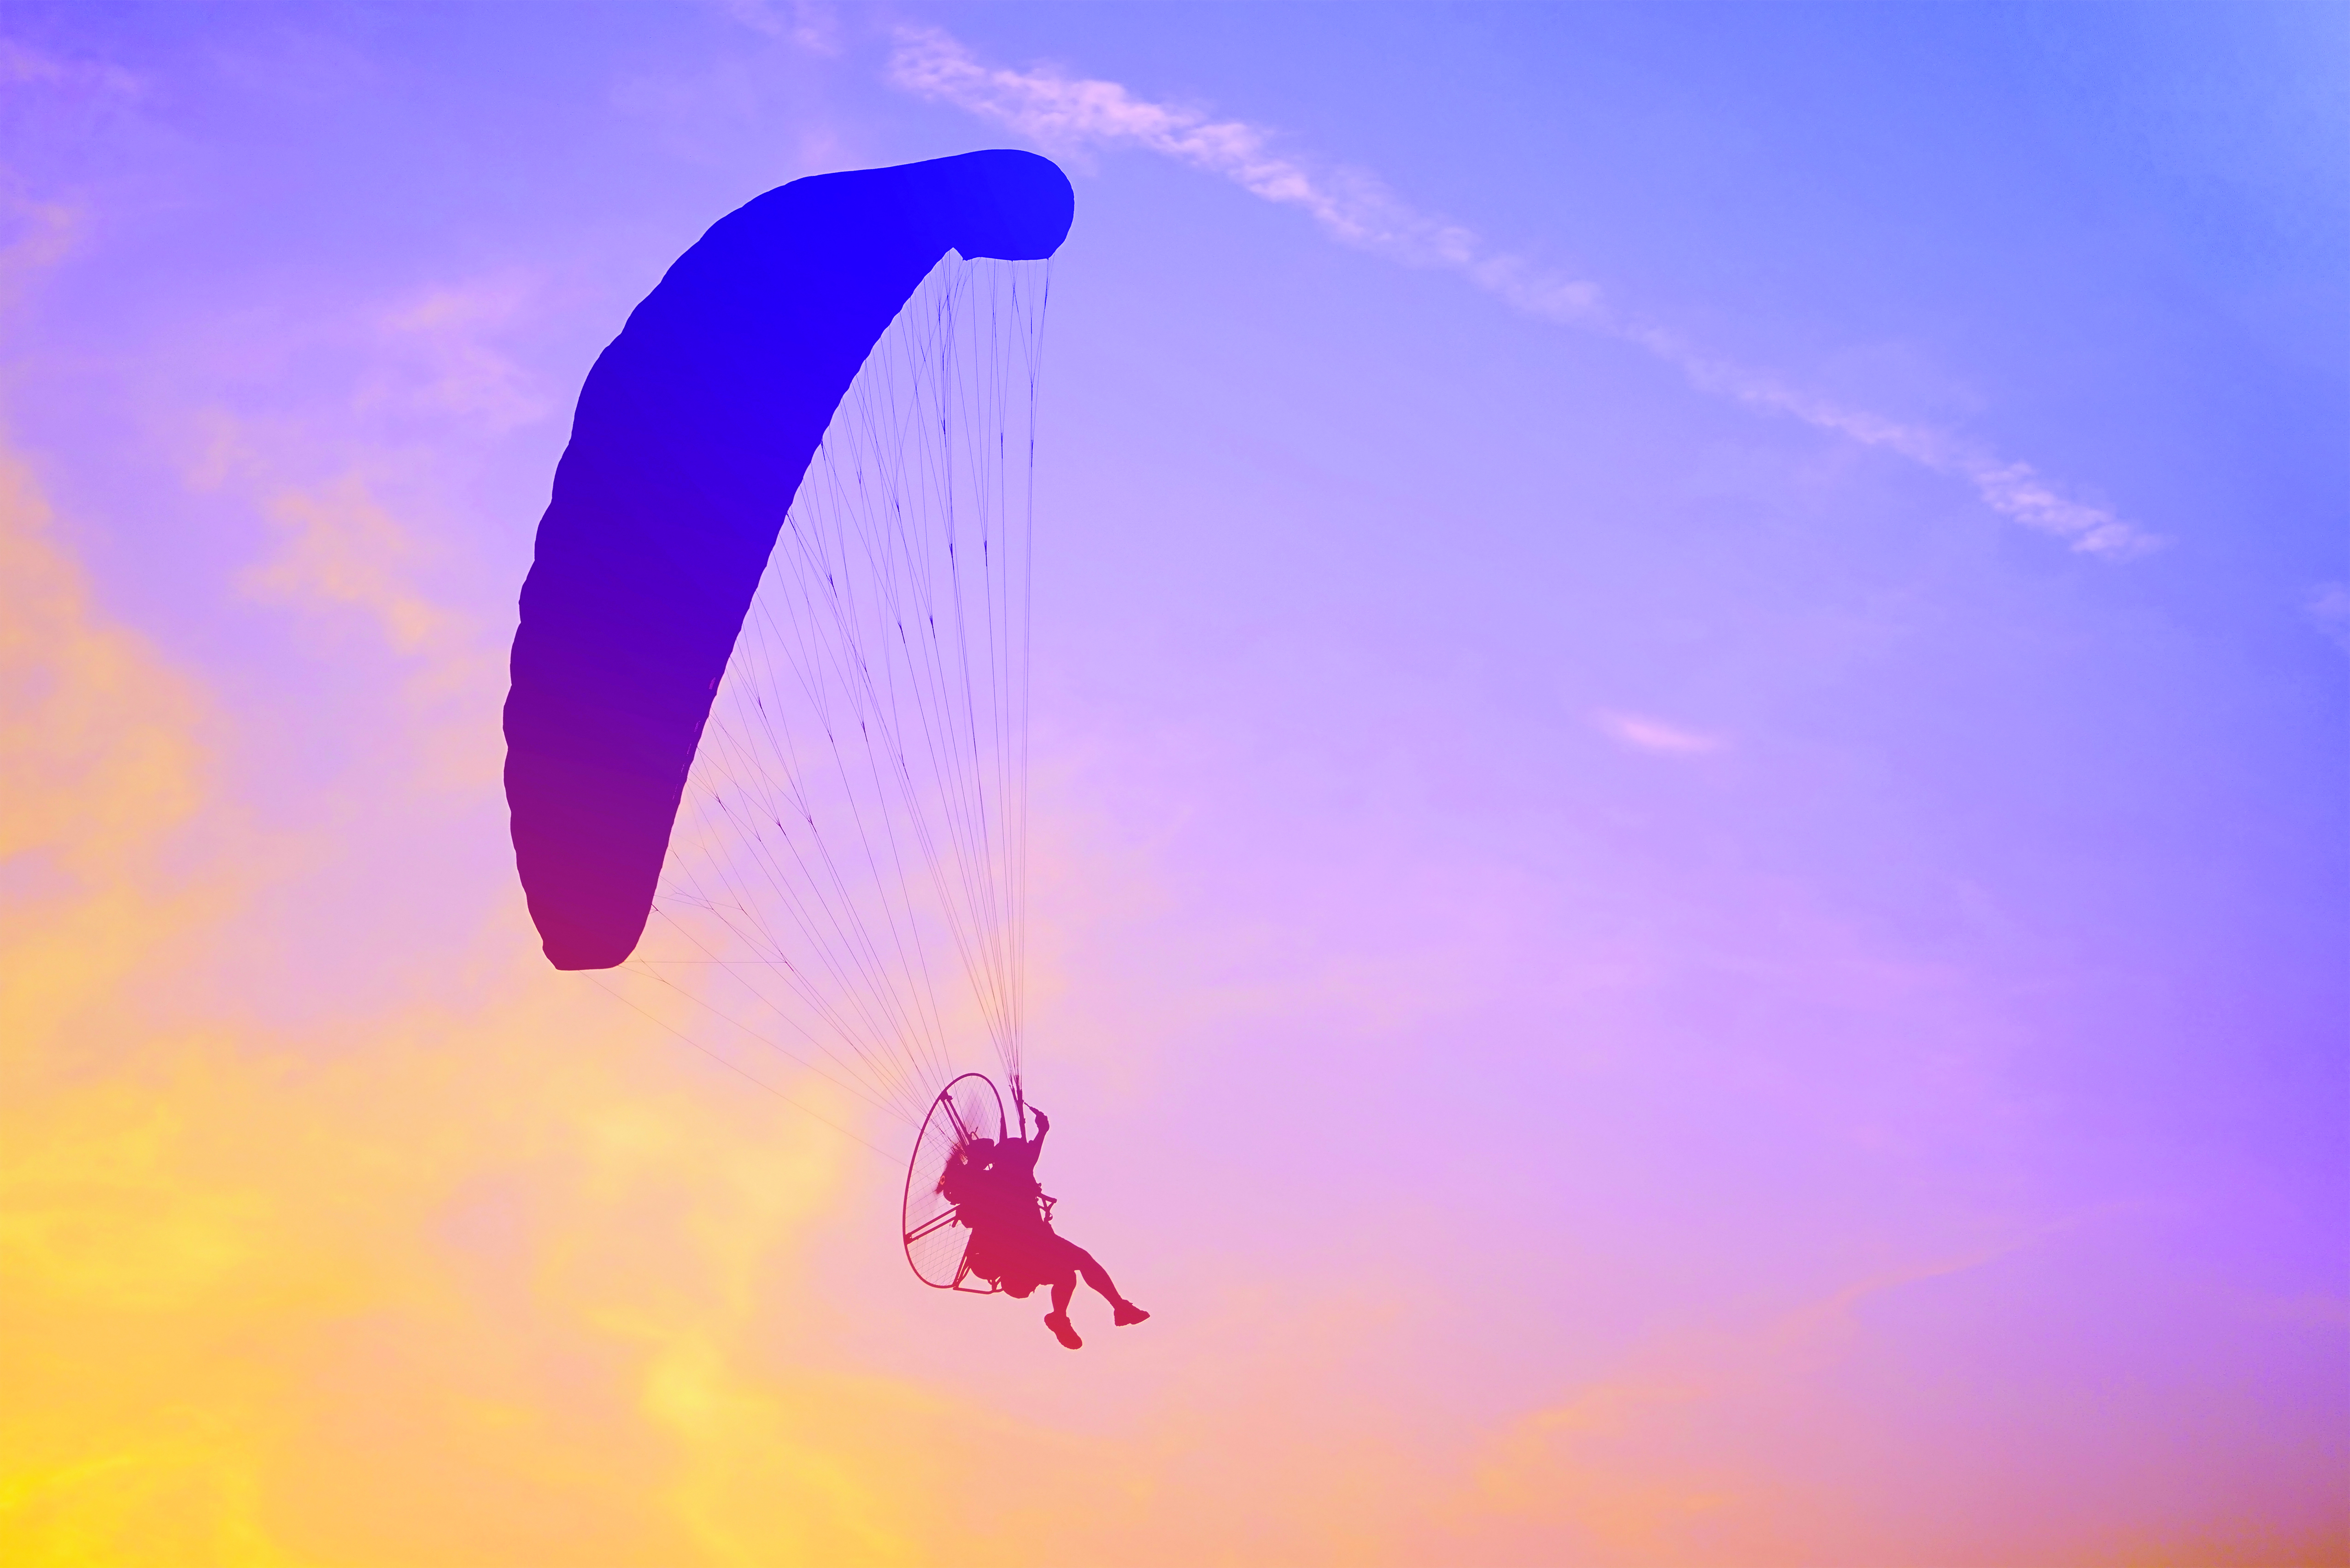 Oman sports: Take a paramotoring course in Oman